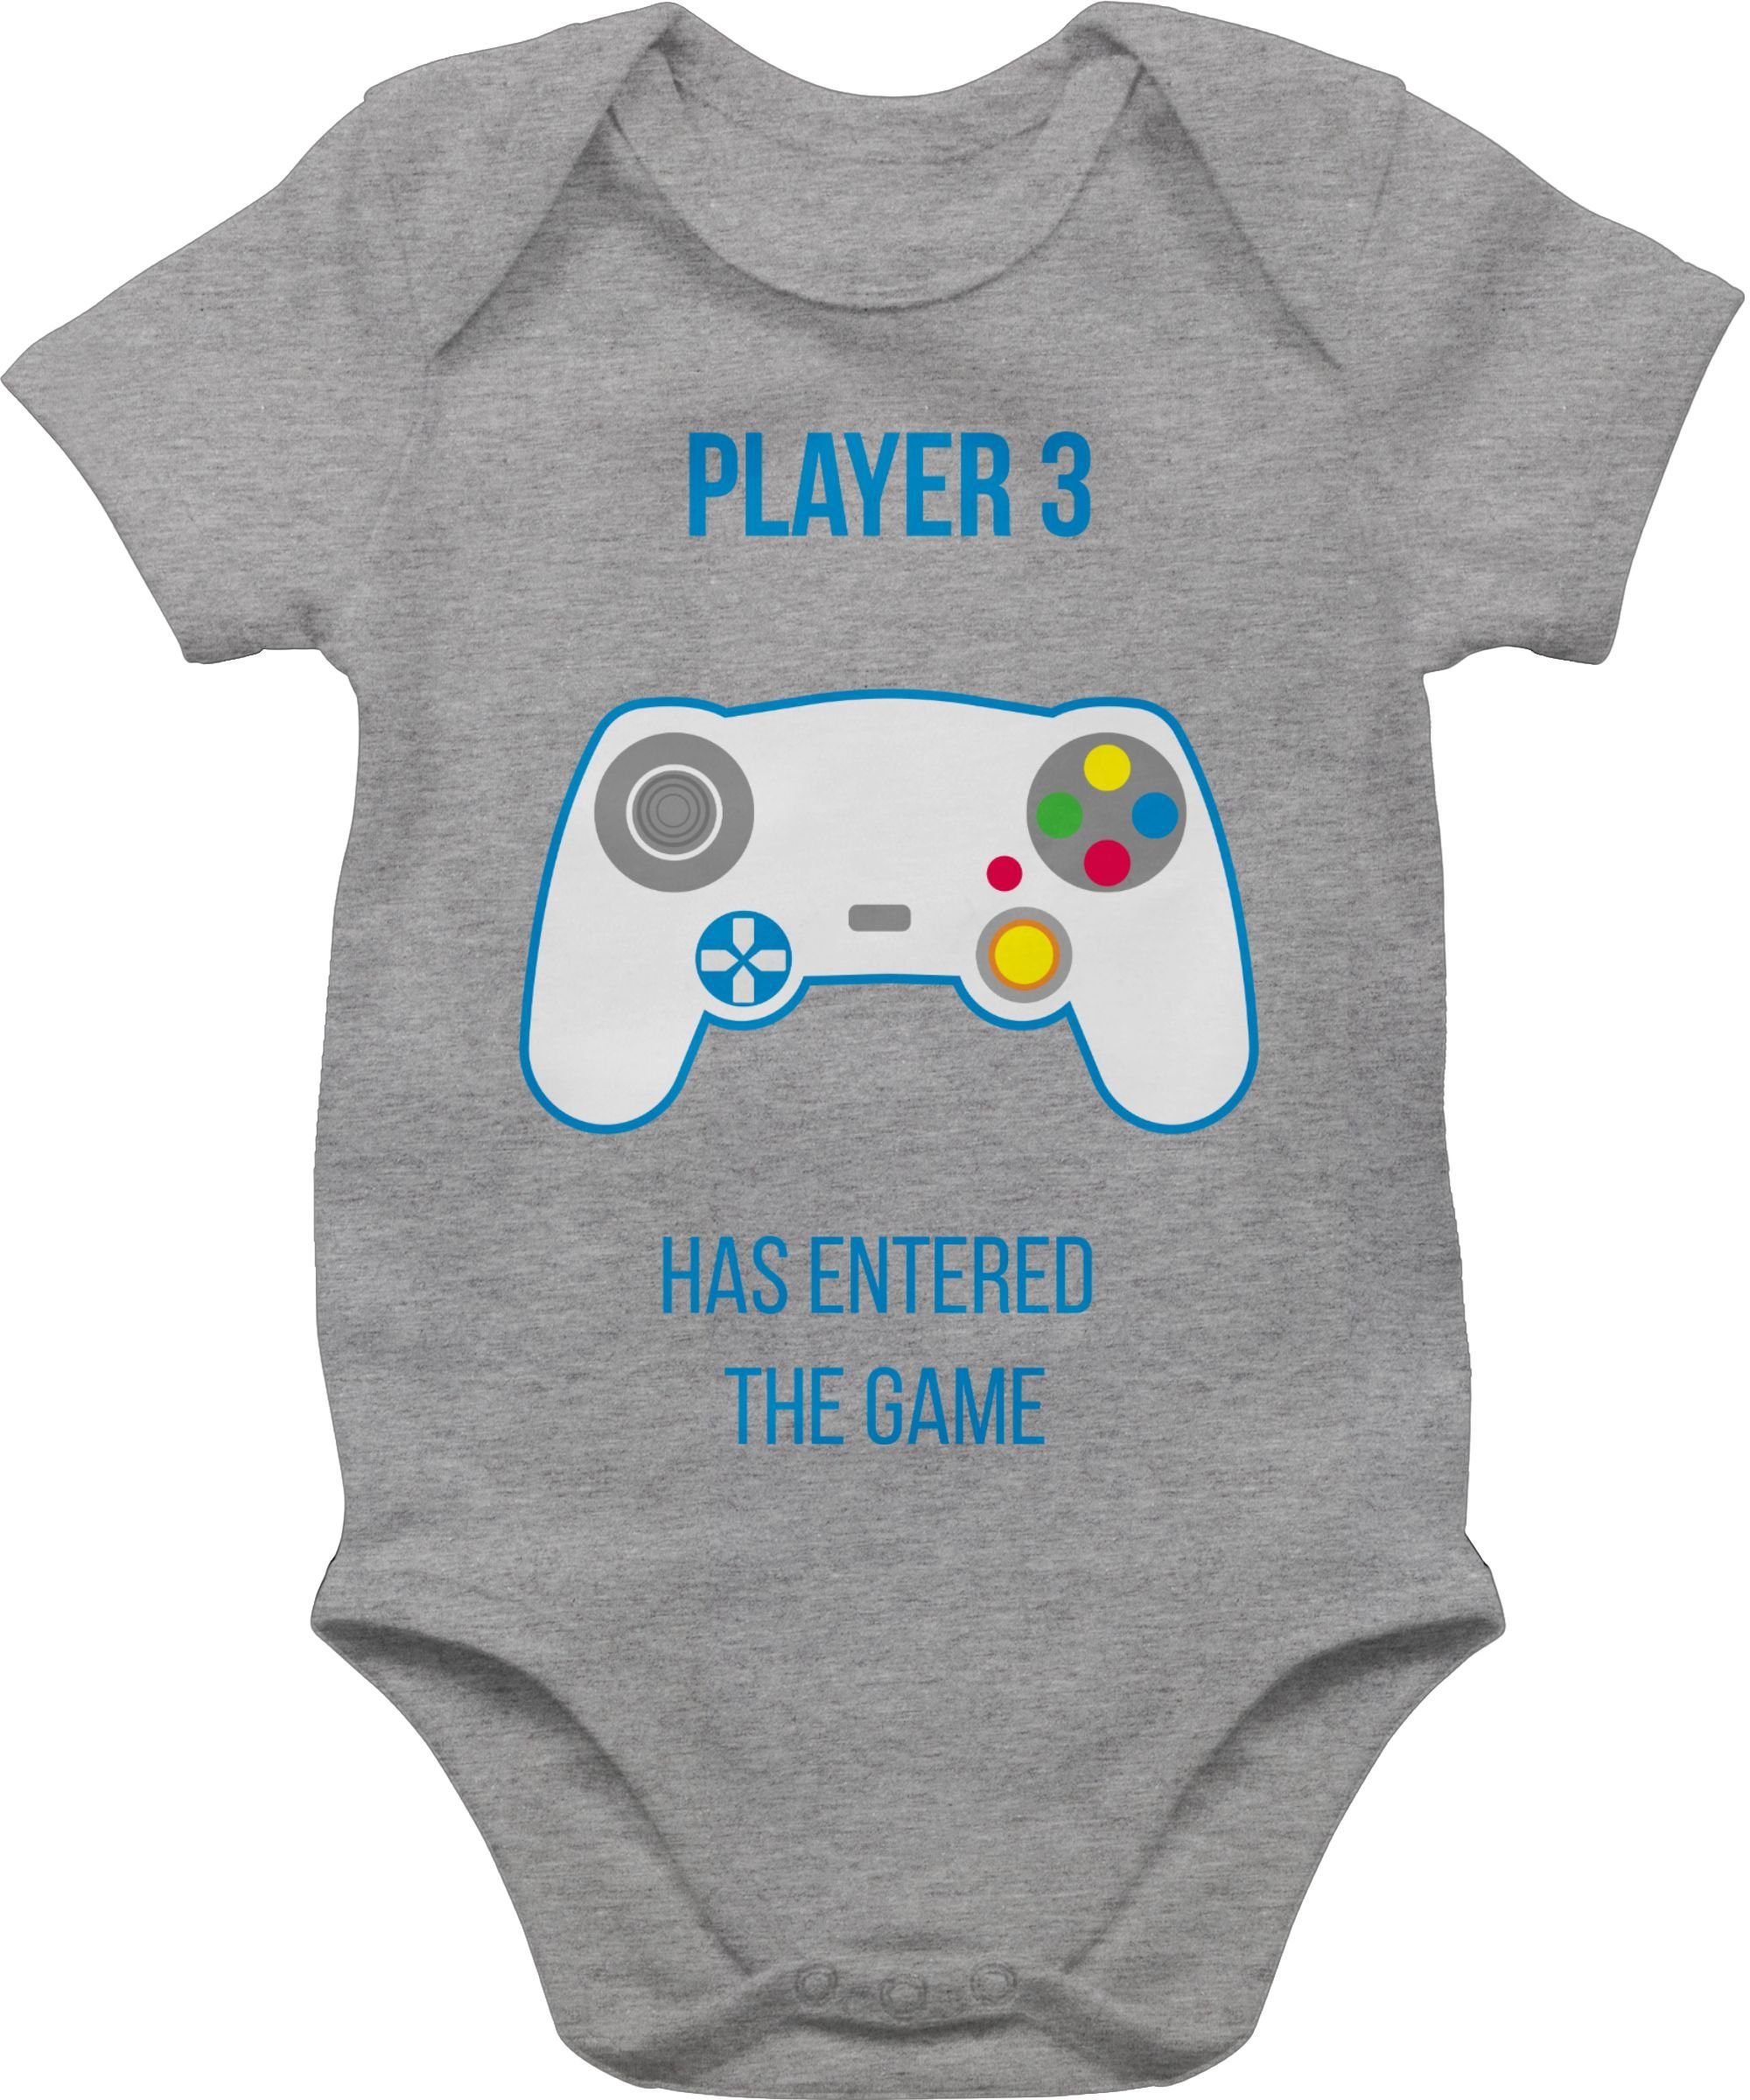 Shirtracer Shirtbody Player 3 has entered the game Controller weiß Aktuelle Trends Baby 3 Grau meliert